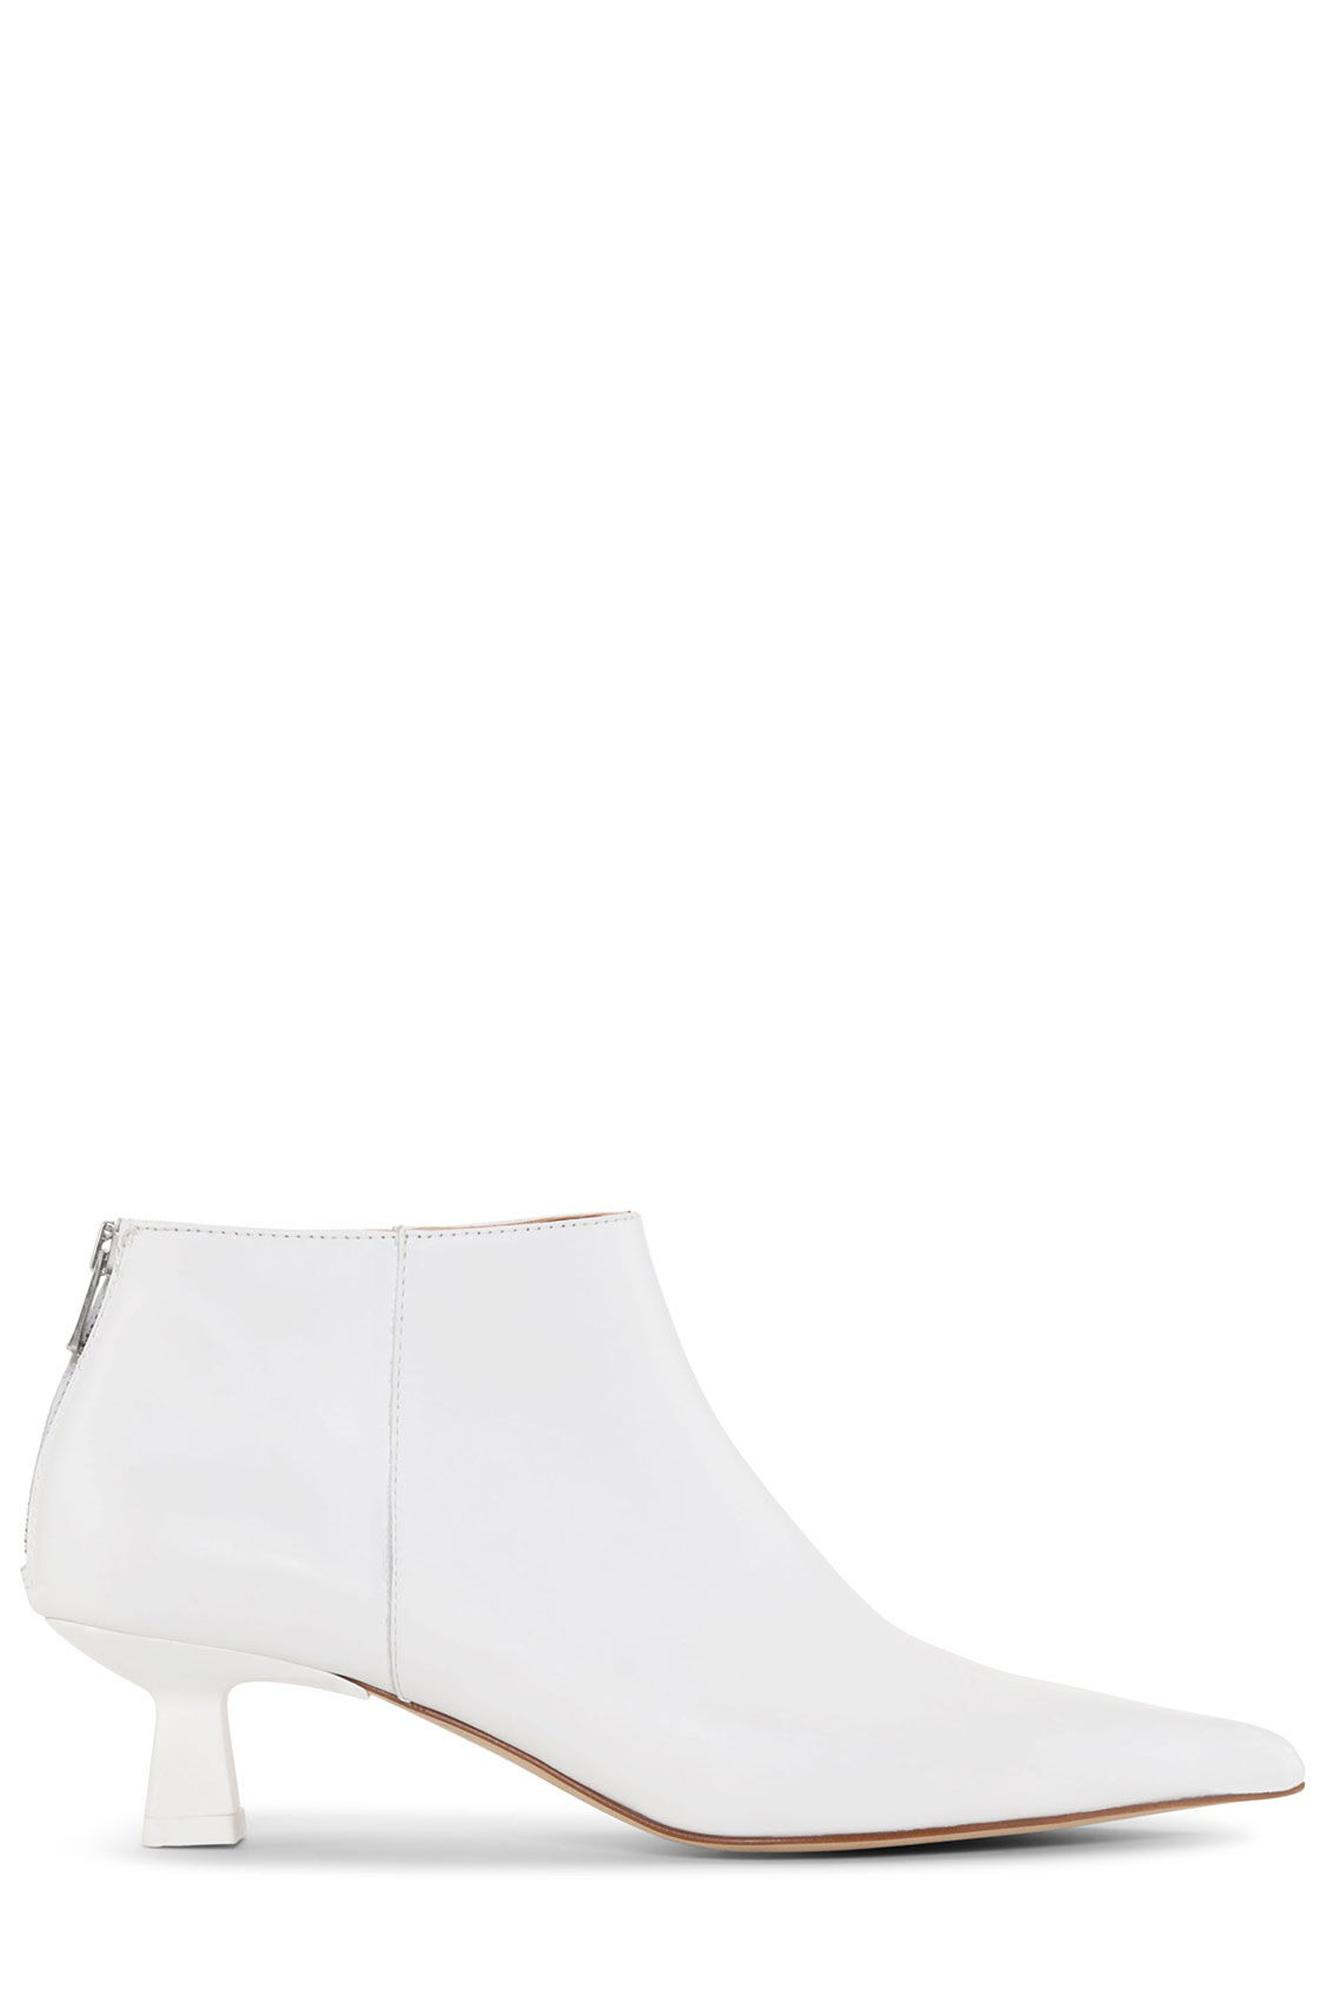 Ganni Pointy Crop Boot White In Leather | Lyst